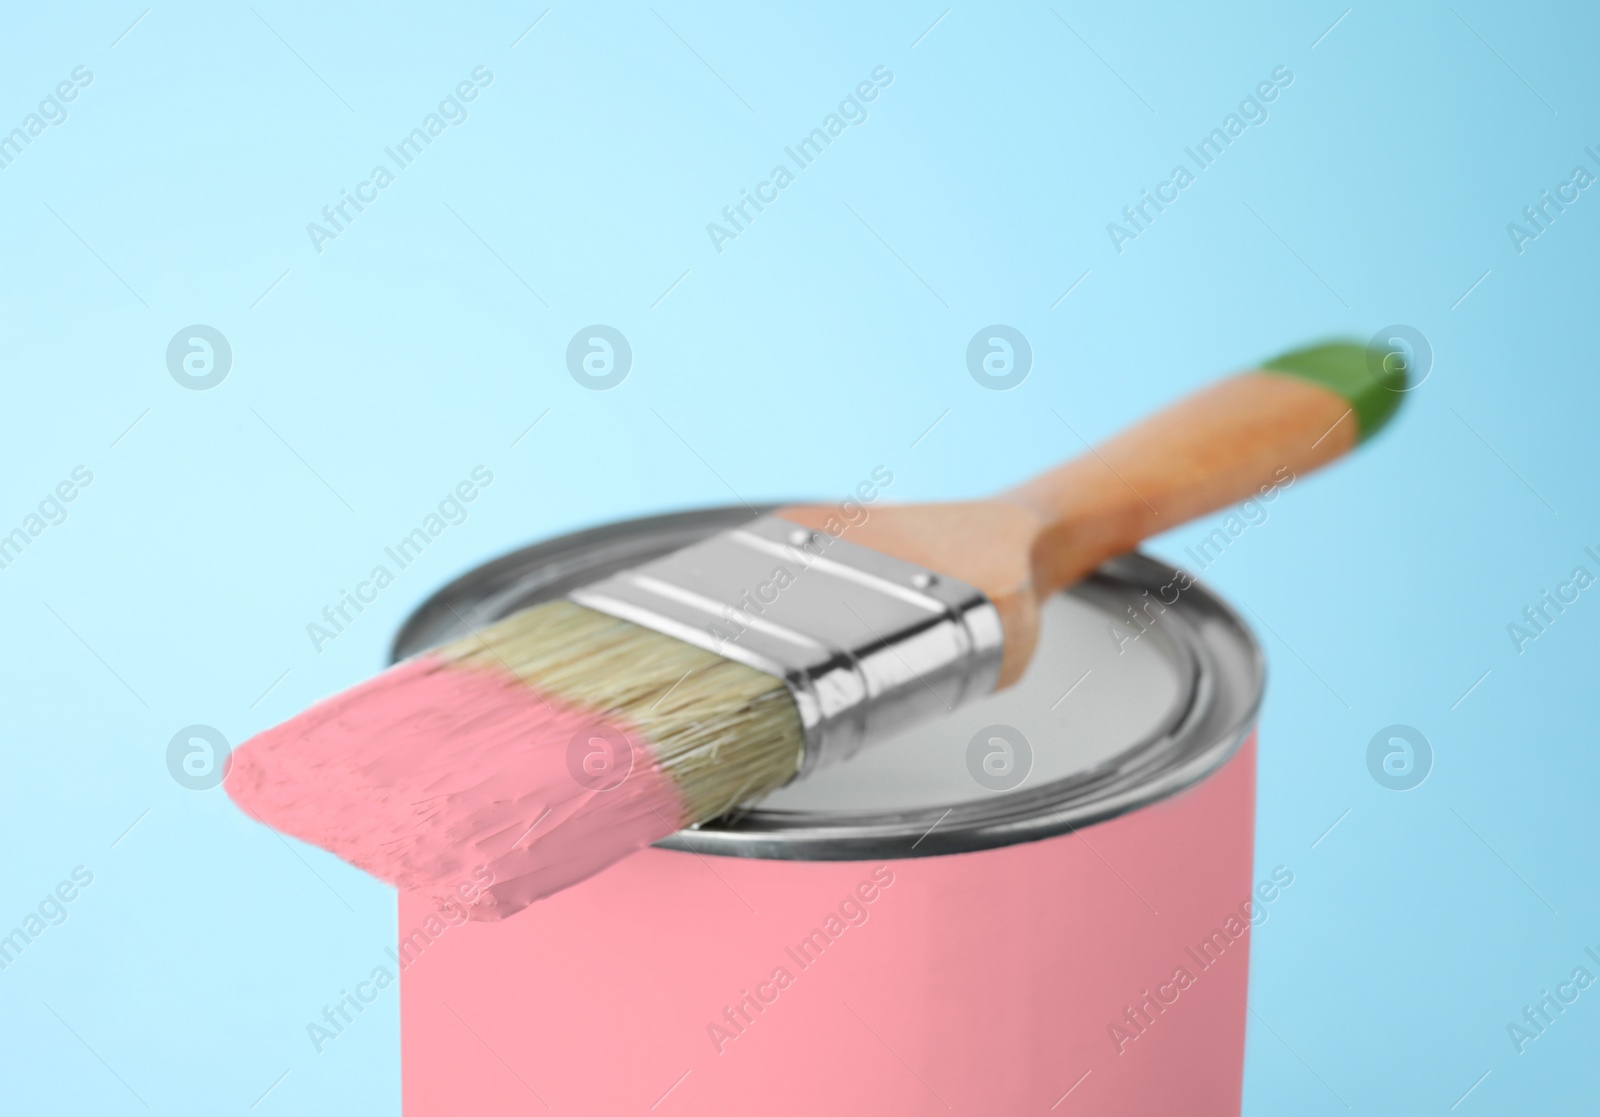 Photo of Can of pink paint with brush on blue background